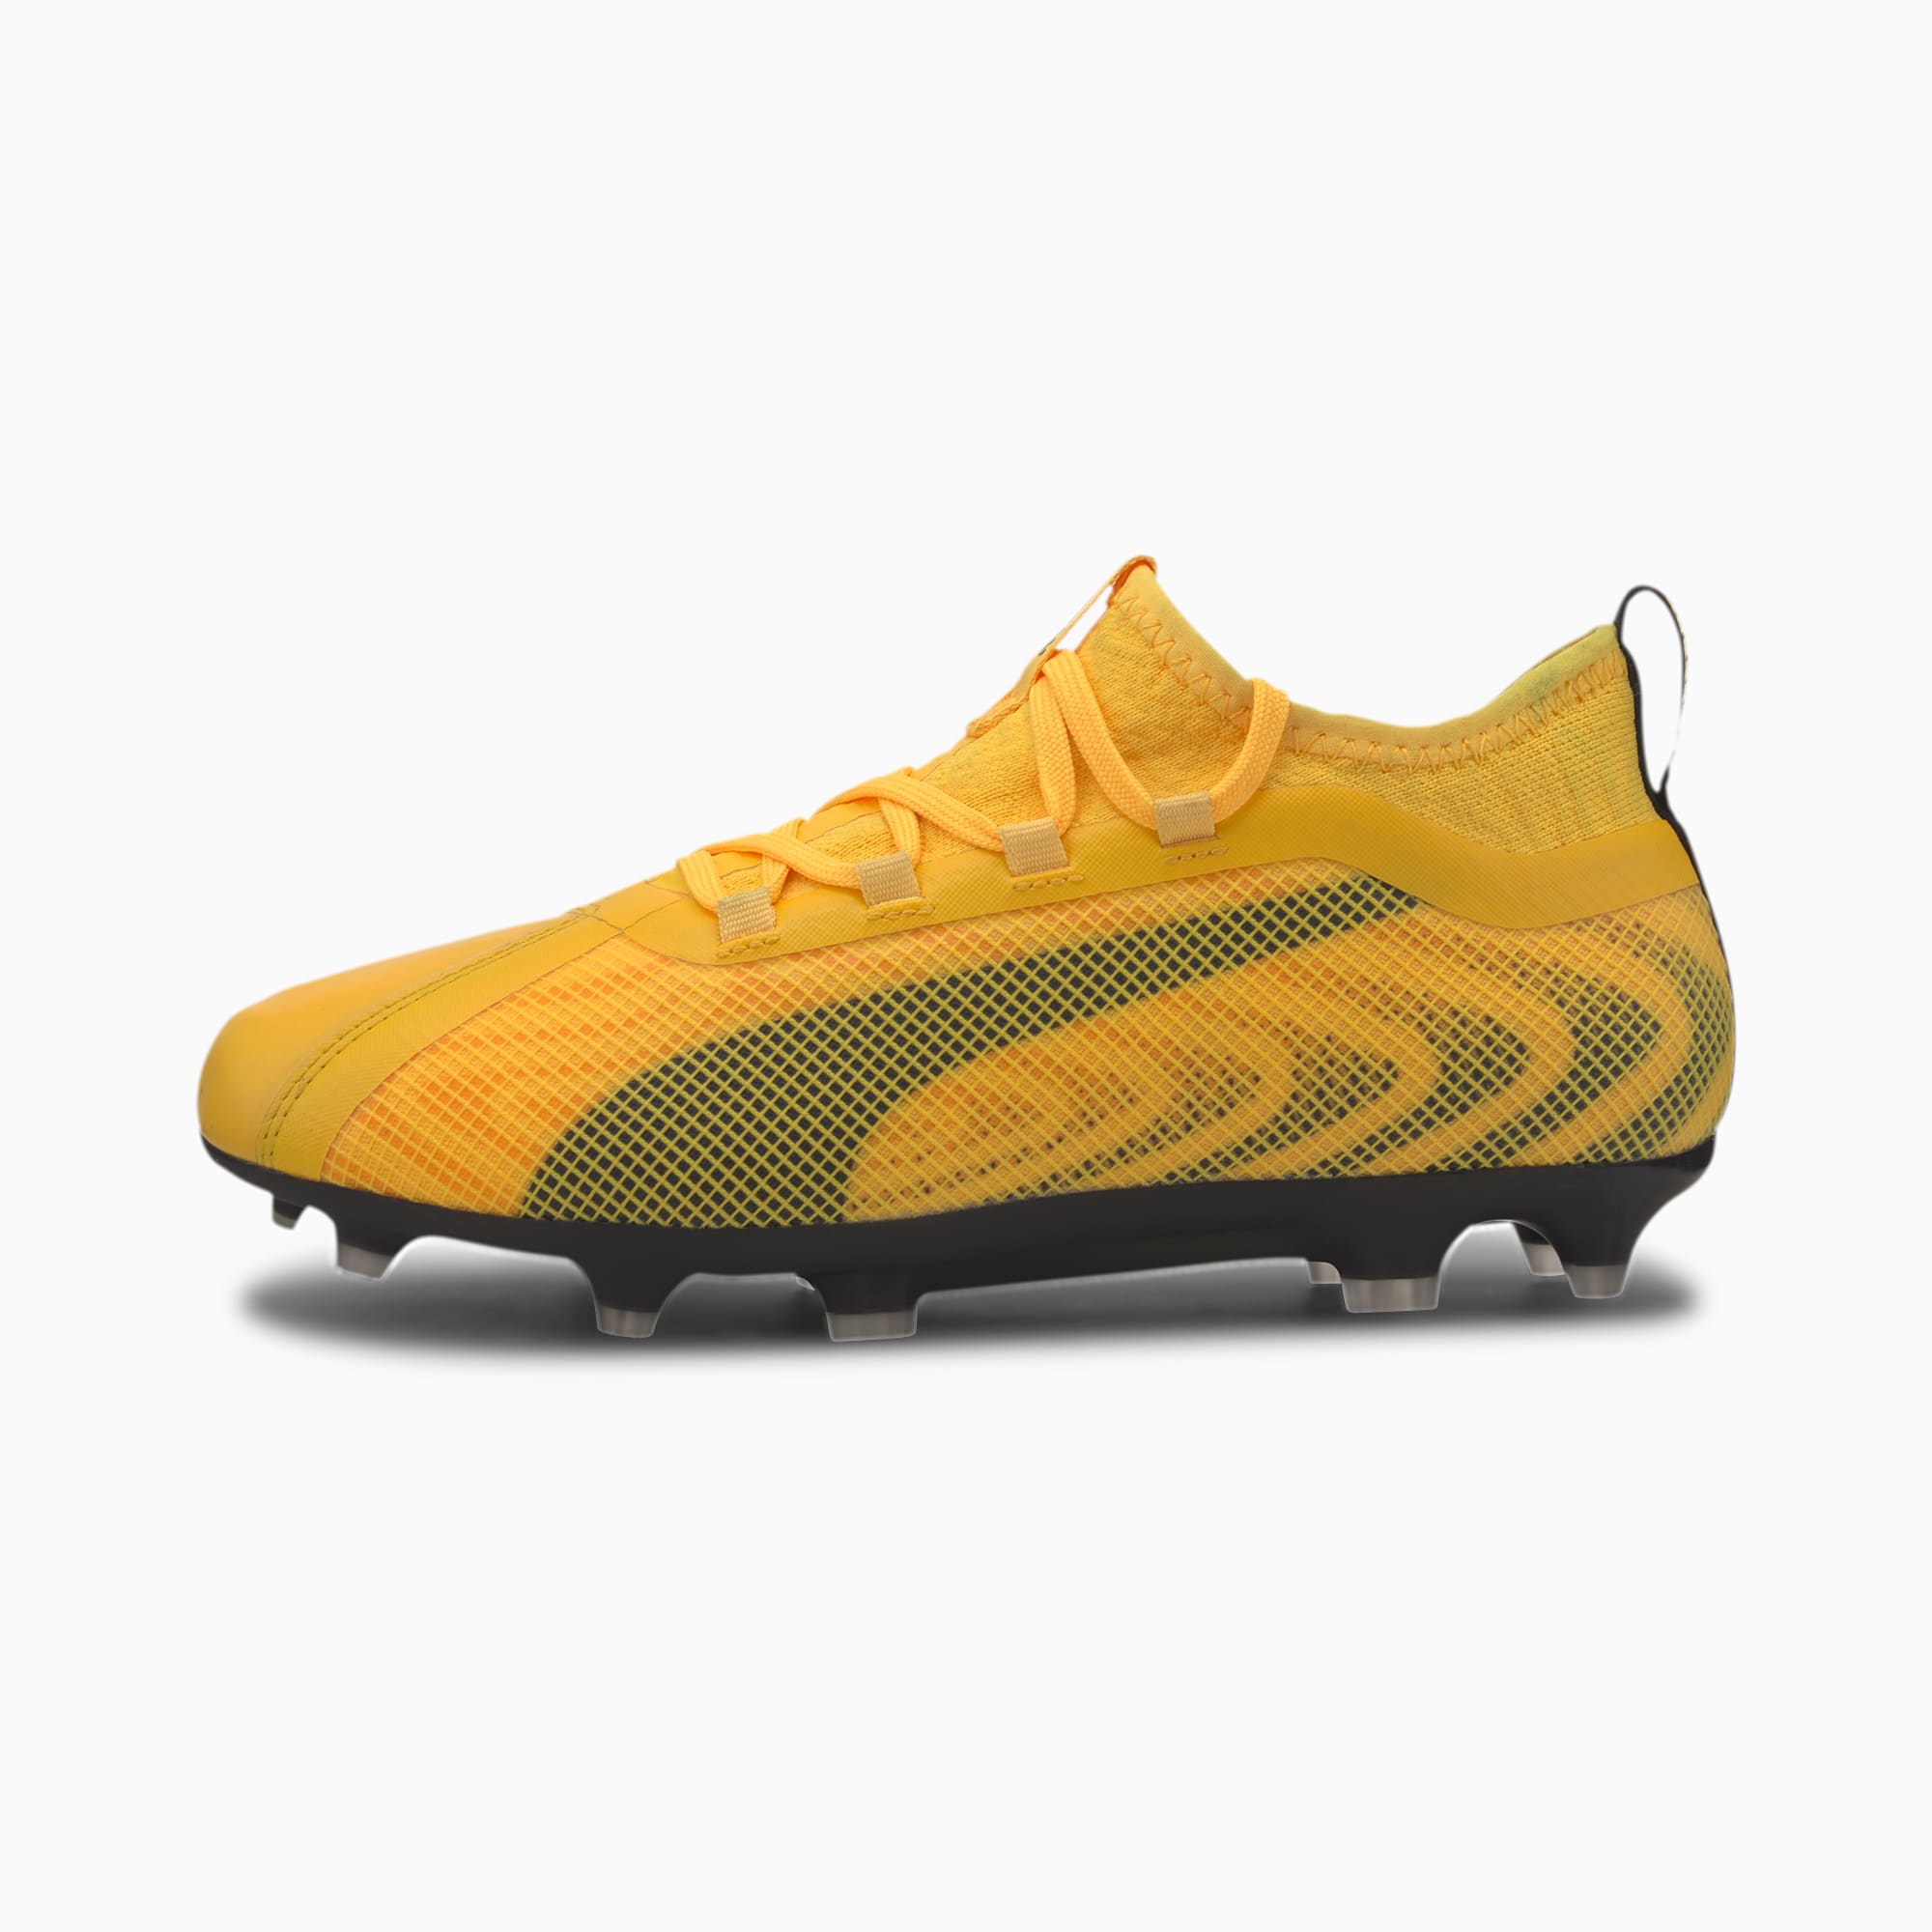 puma youth soccer cleats